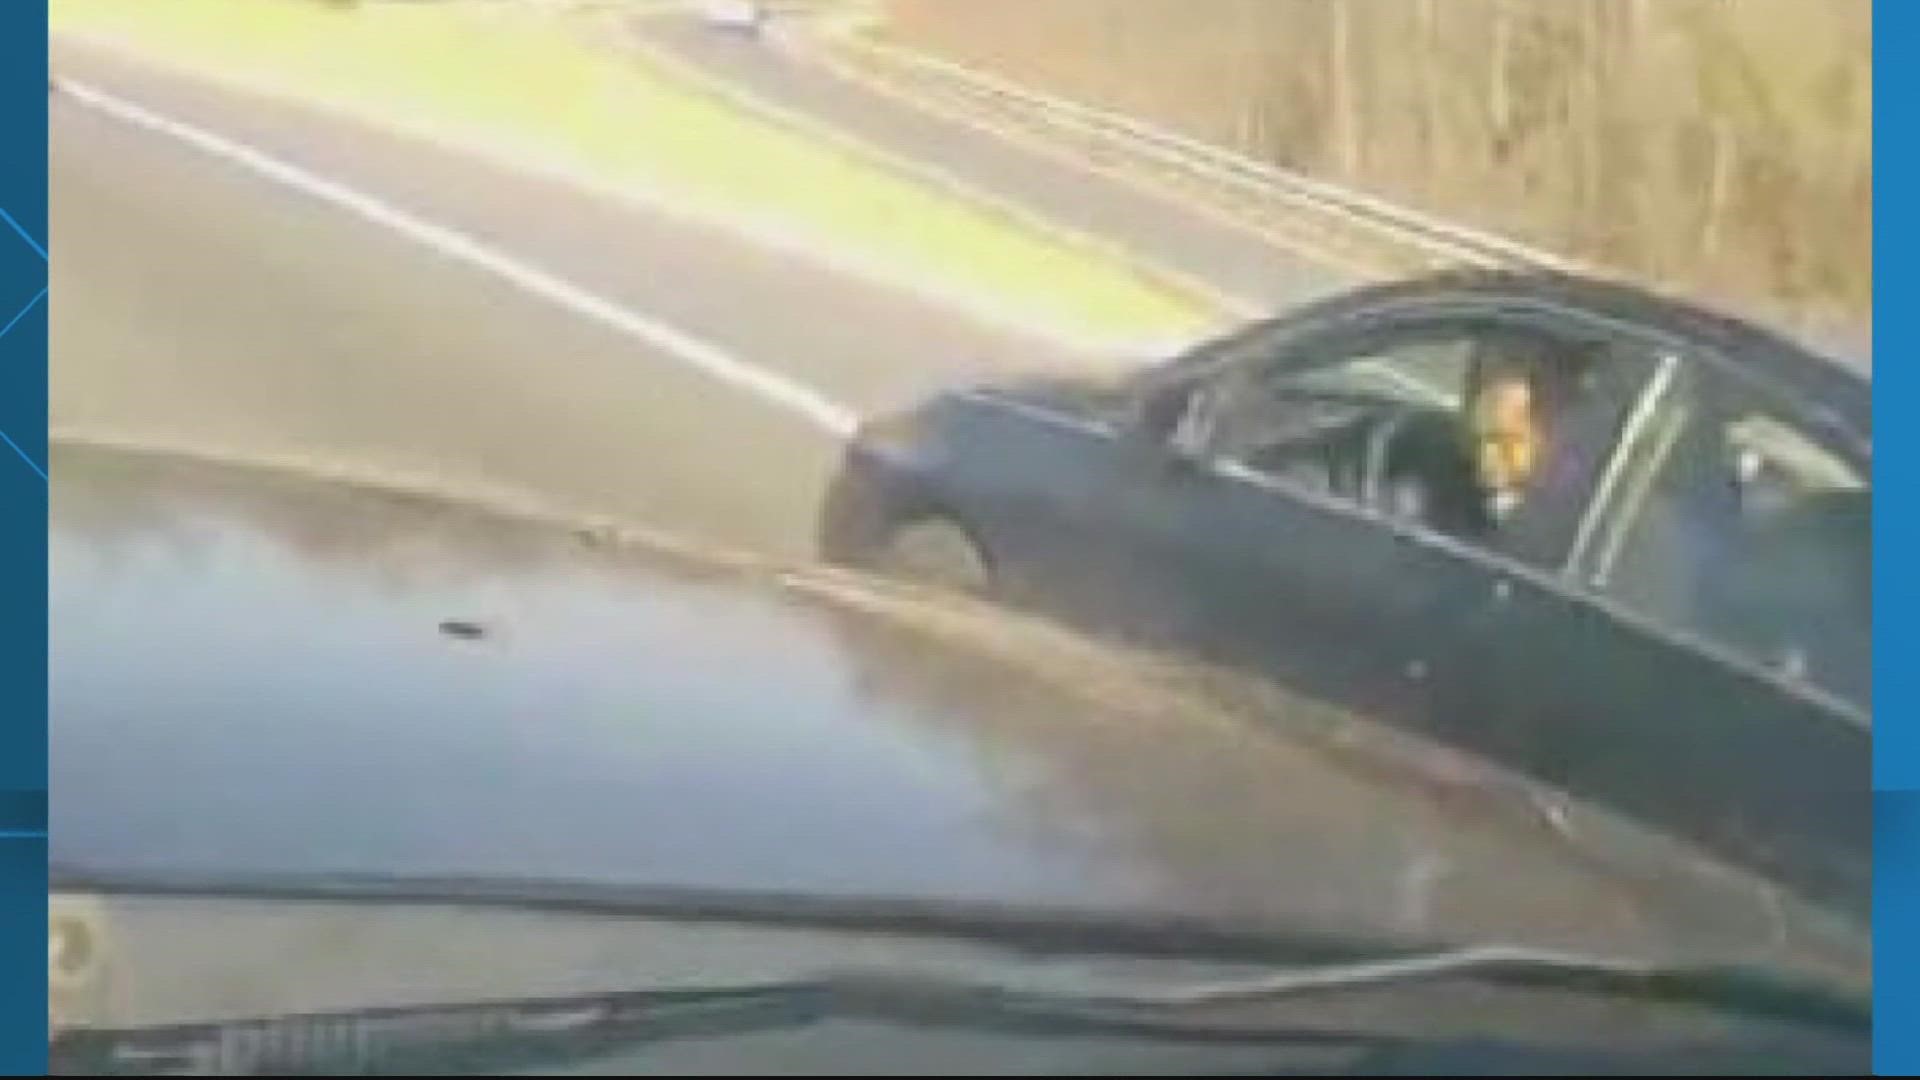 Maryland State Police released video of a fatal road rage shooting Monday that occurred in March on Route 50 in Cheverly. The case is still unsolved.